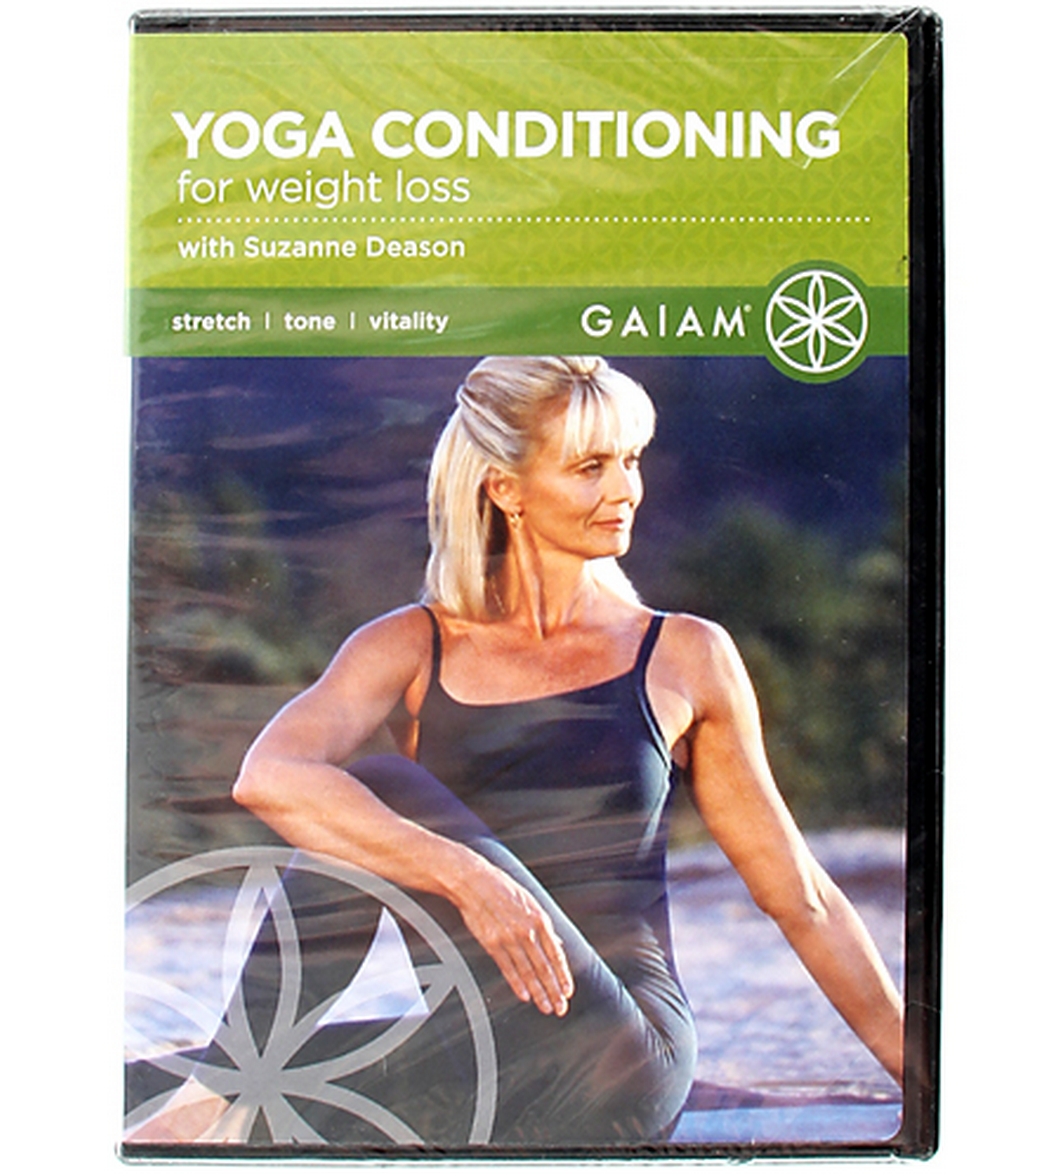 Gaiam Yoga Conditioning For Weight Loss Dvd At Yogaoutlet regarding yoga for weight loss susan deason with regard to Motivate